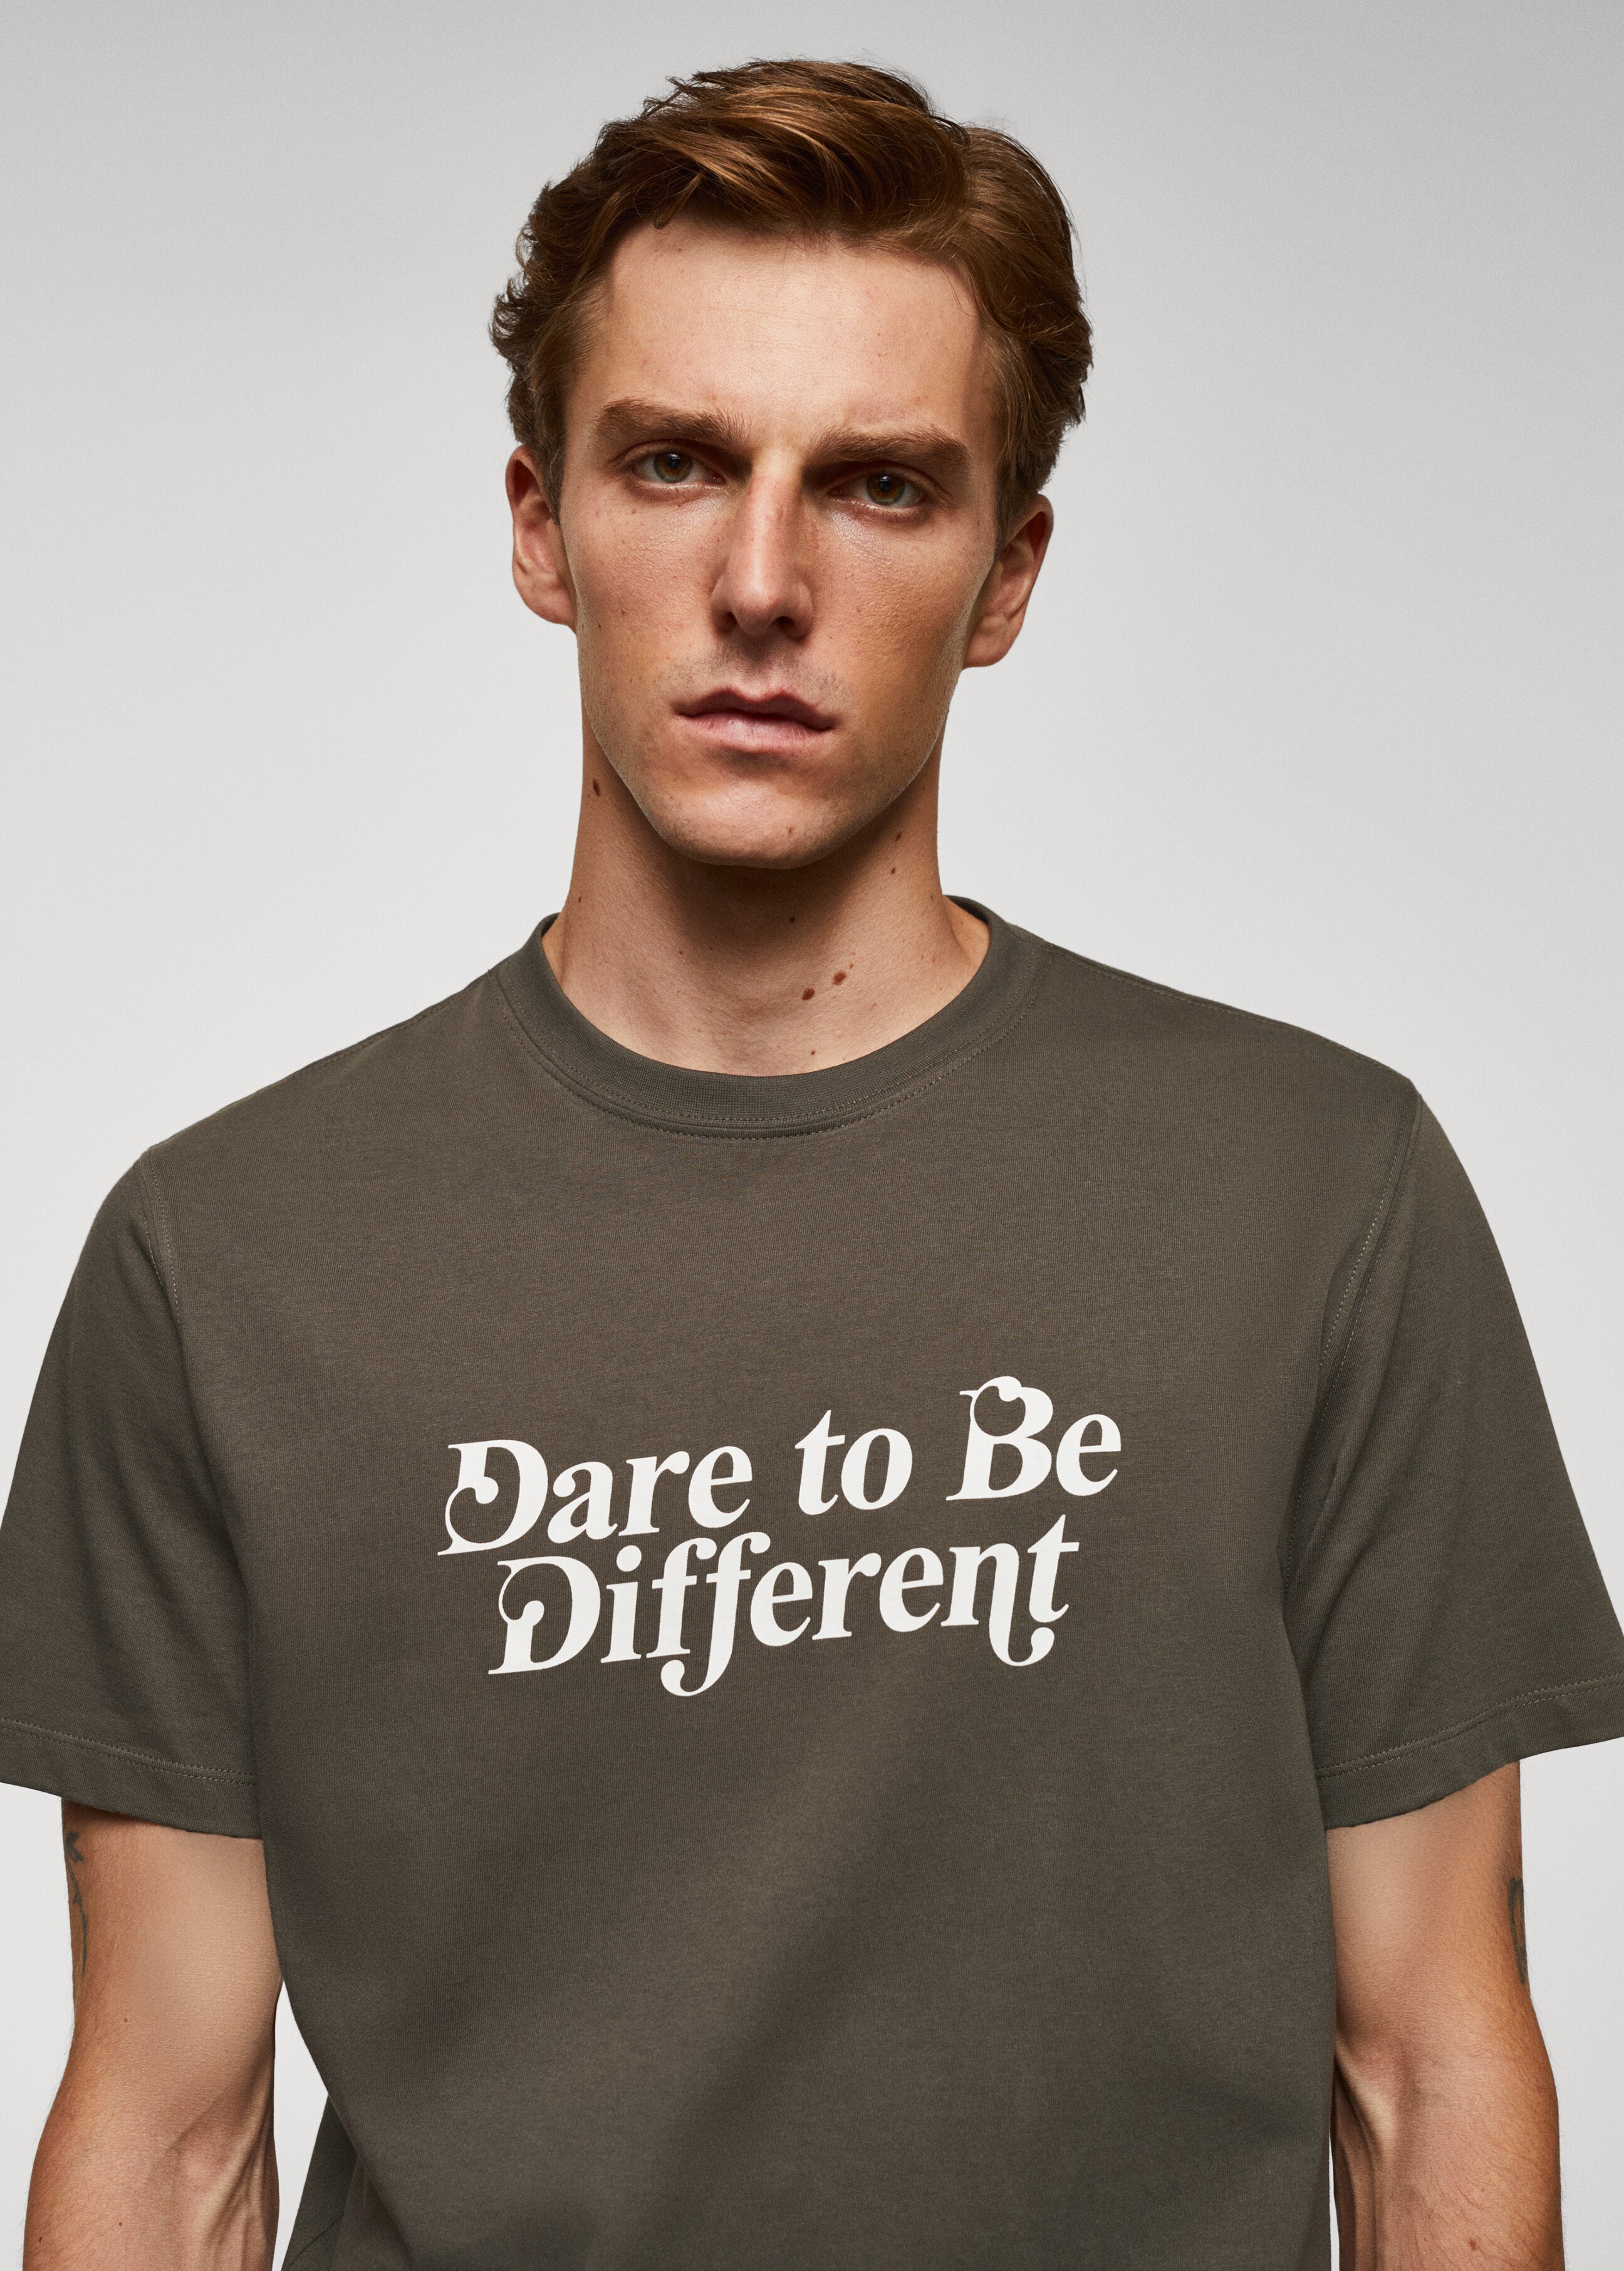 100% cotton printed t-shirt - Details of the article 1